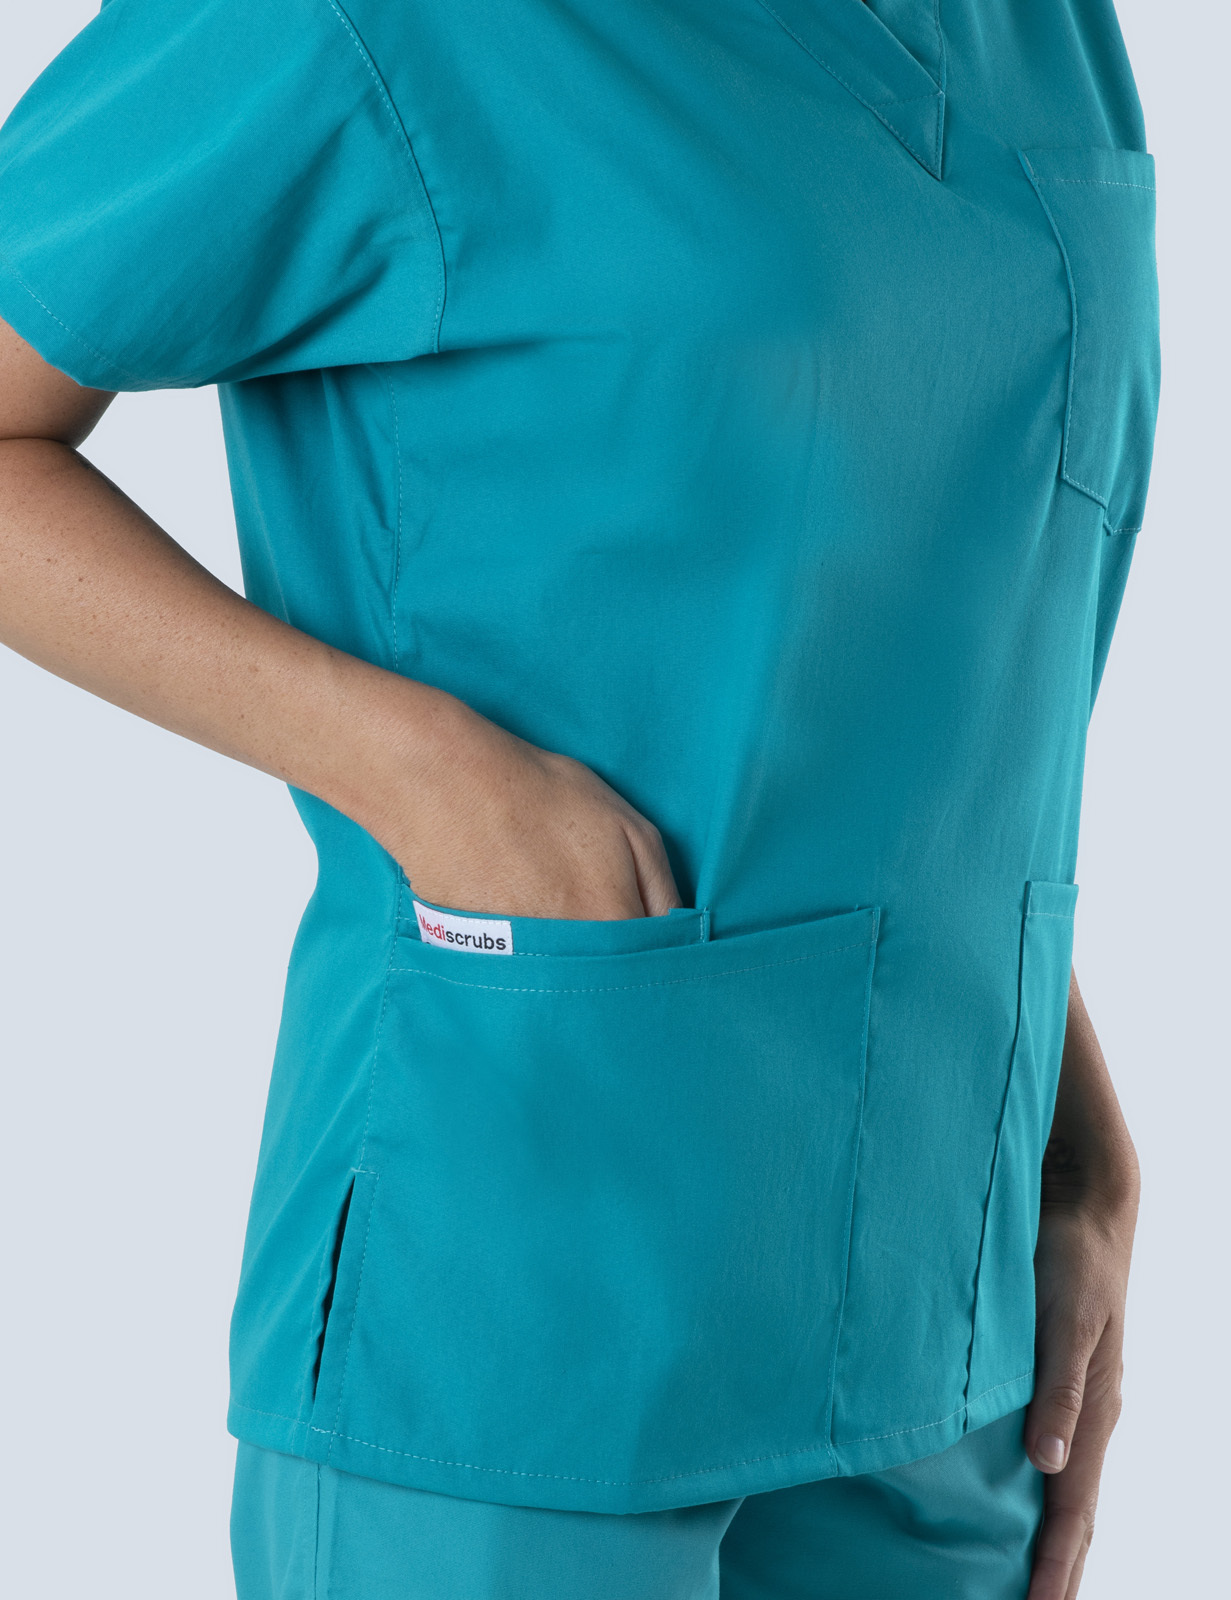 Gold Coast University Hospital - Respiratory Unit RN (4 Pocket Scrub Top and Cargo Pants in Teal incl Logos)